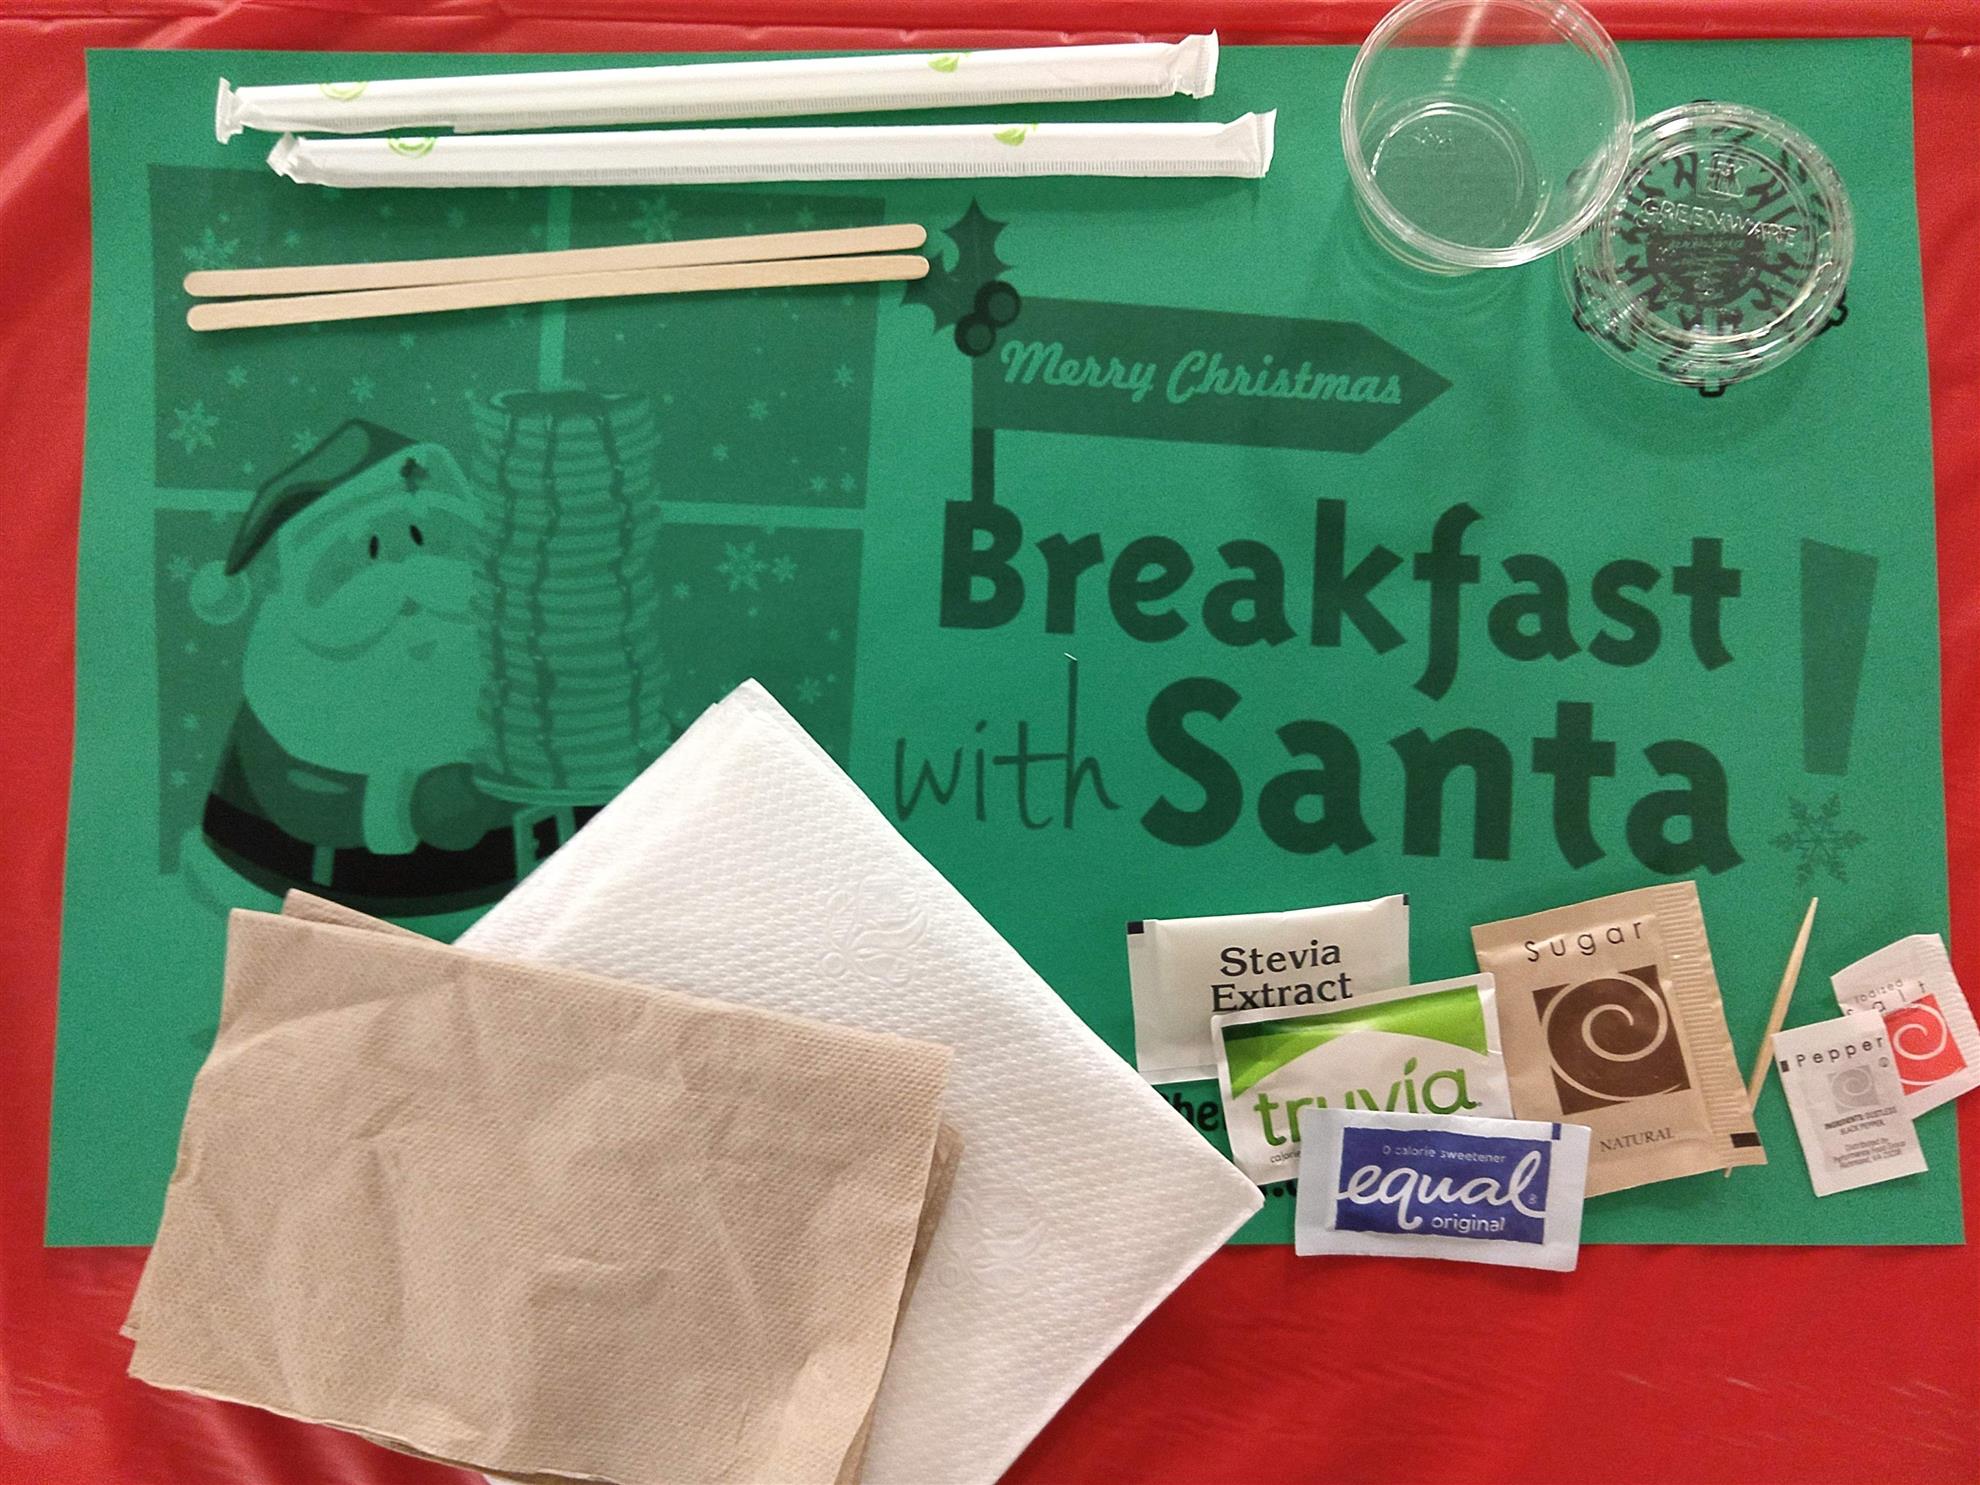 All of these items -- including the placemat -- are compostable!